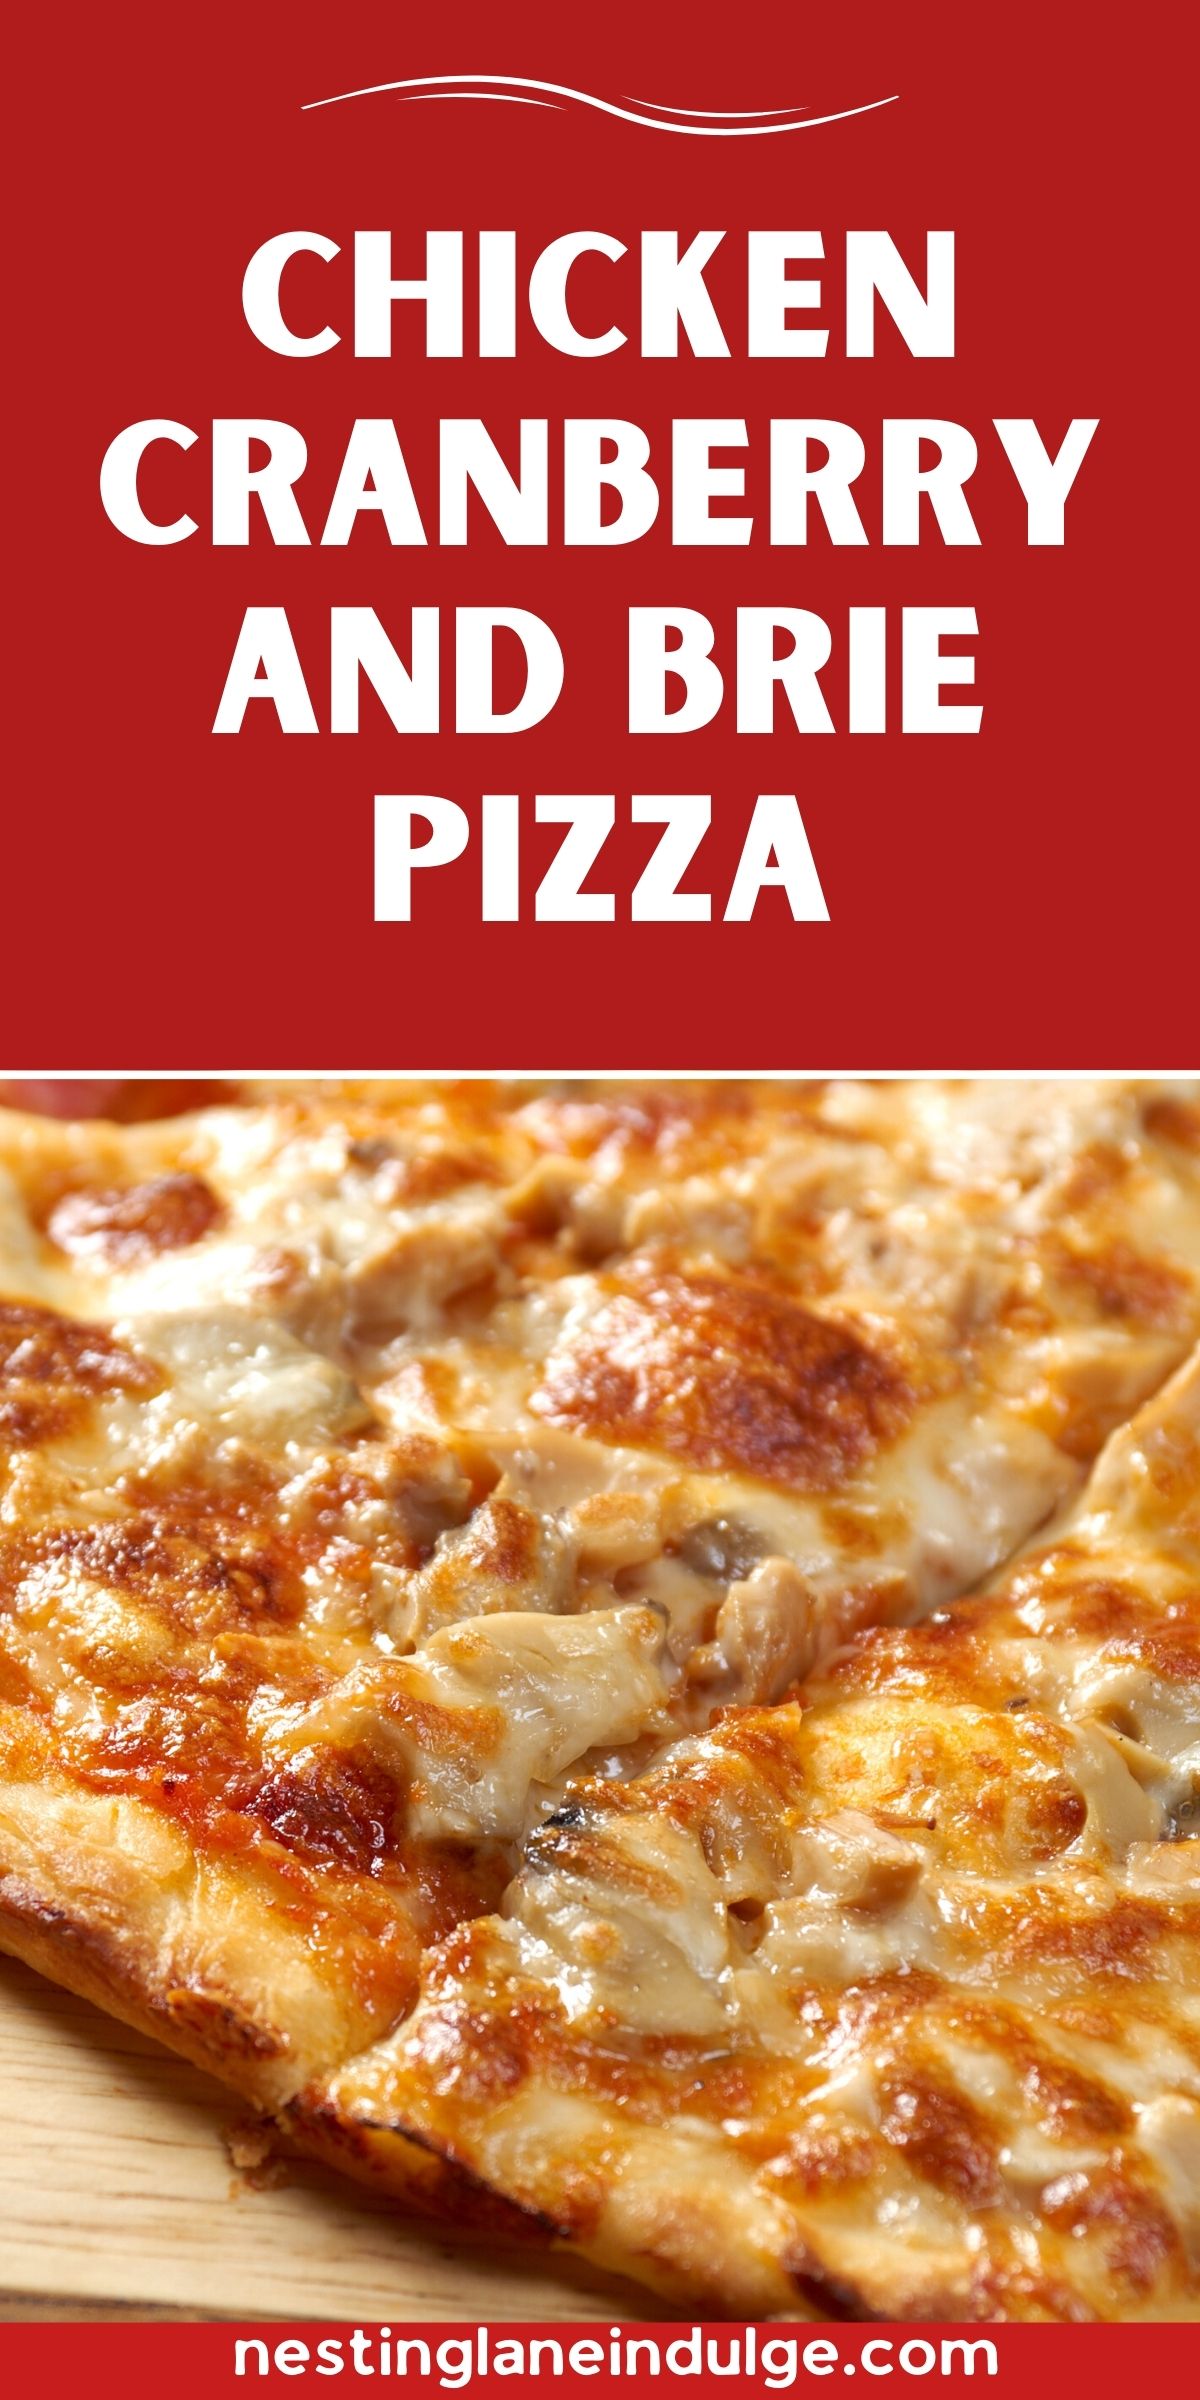 Graphic for Pinterest of Chicken Cranberry and Brie Pizza Recipe.